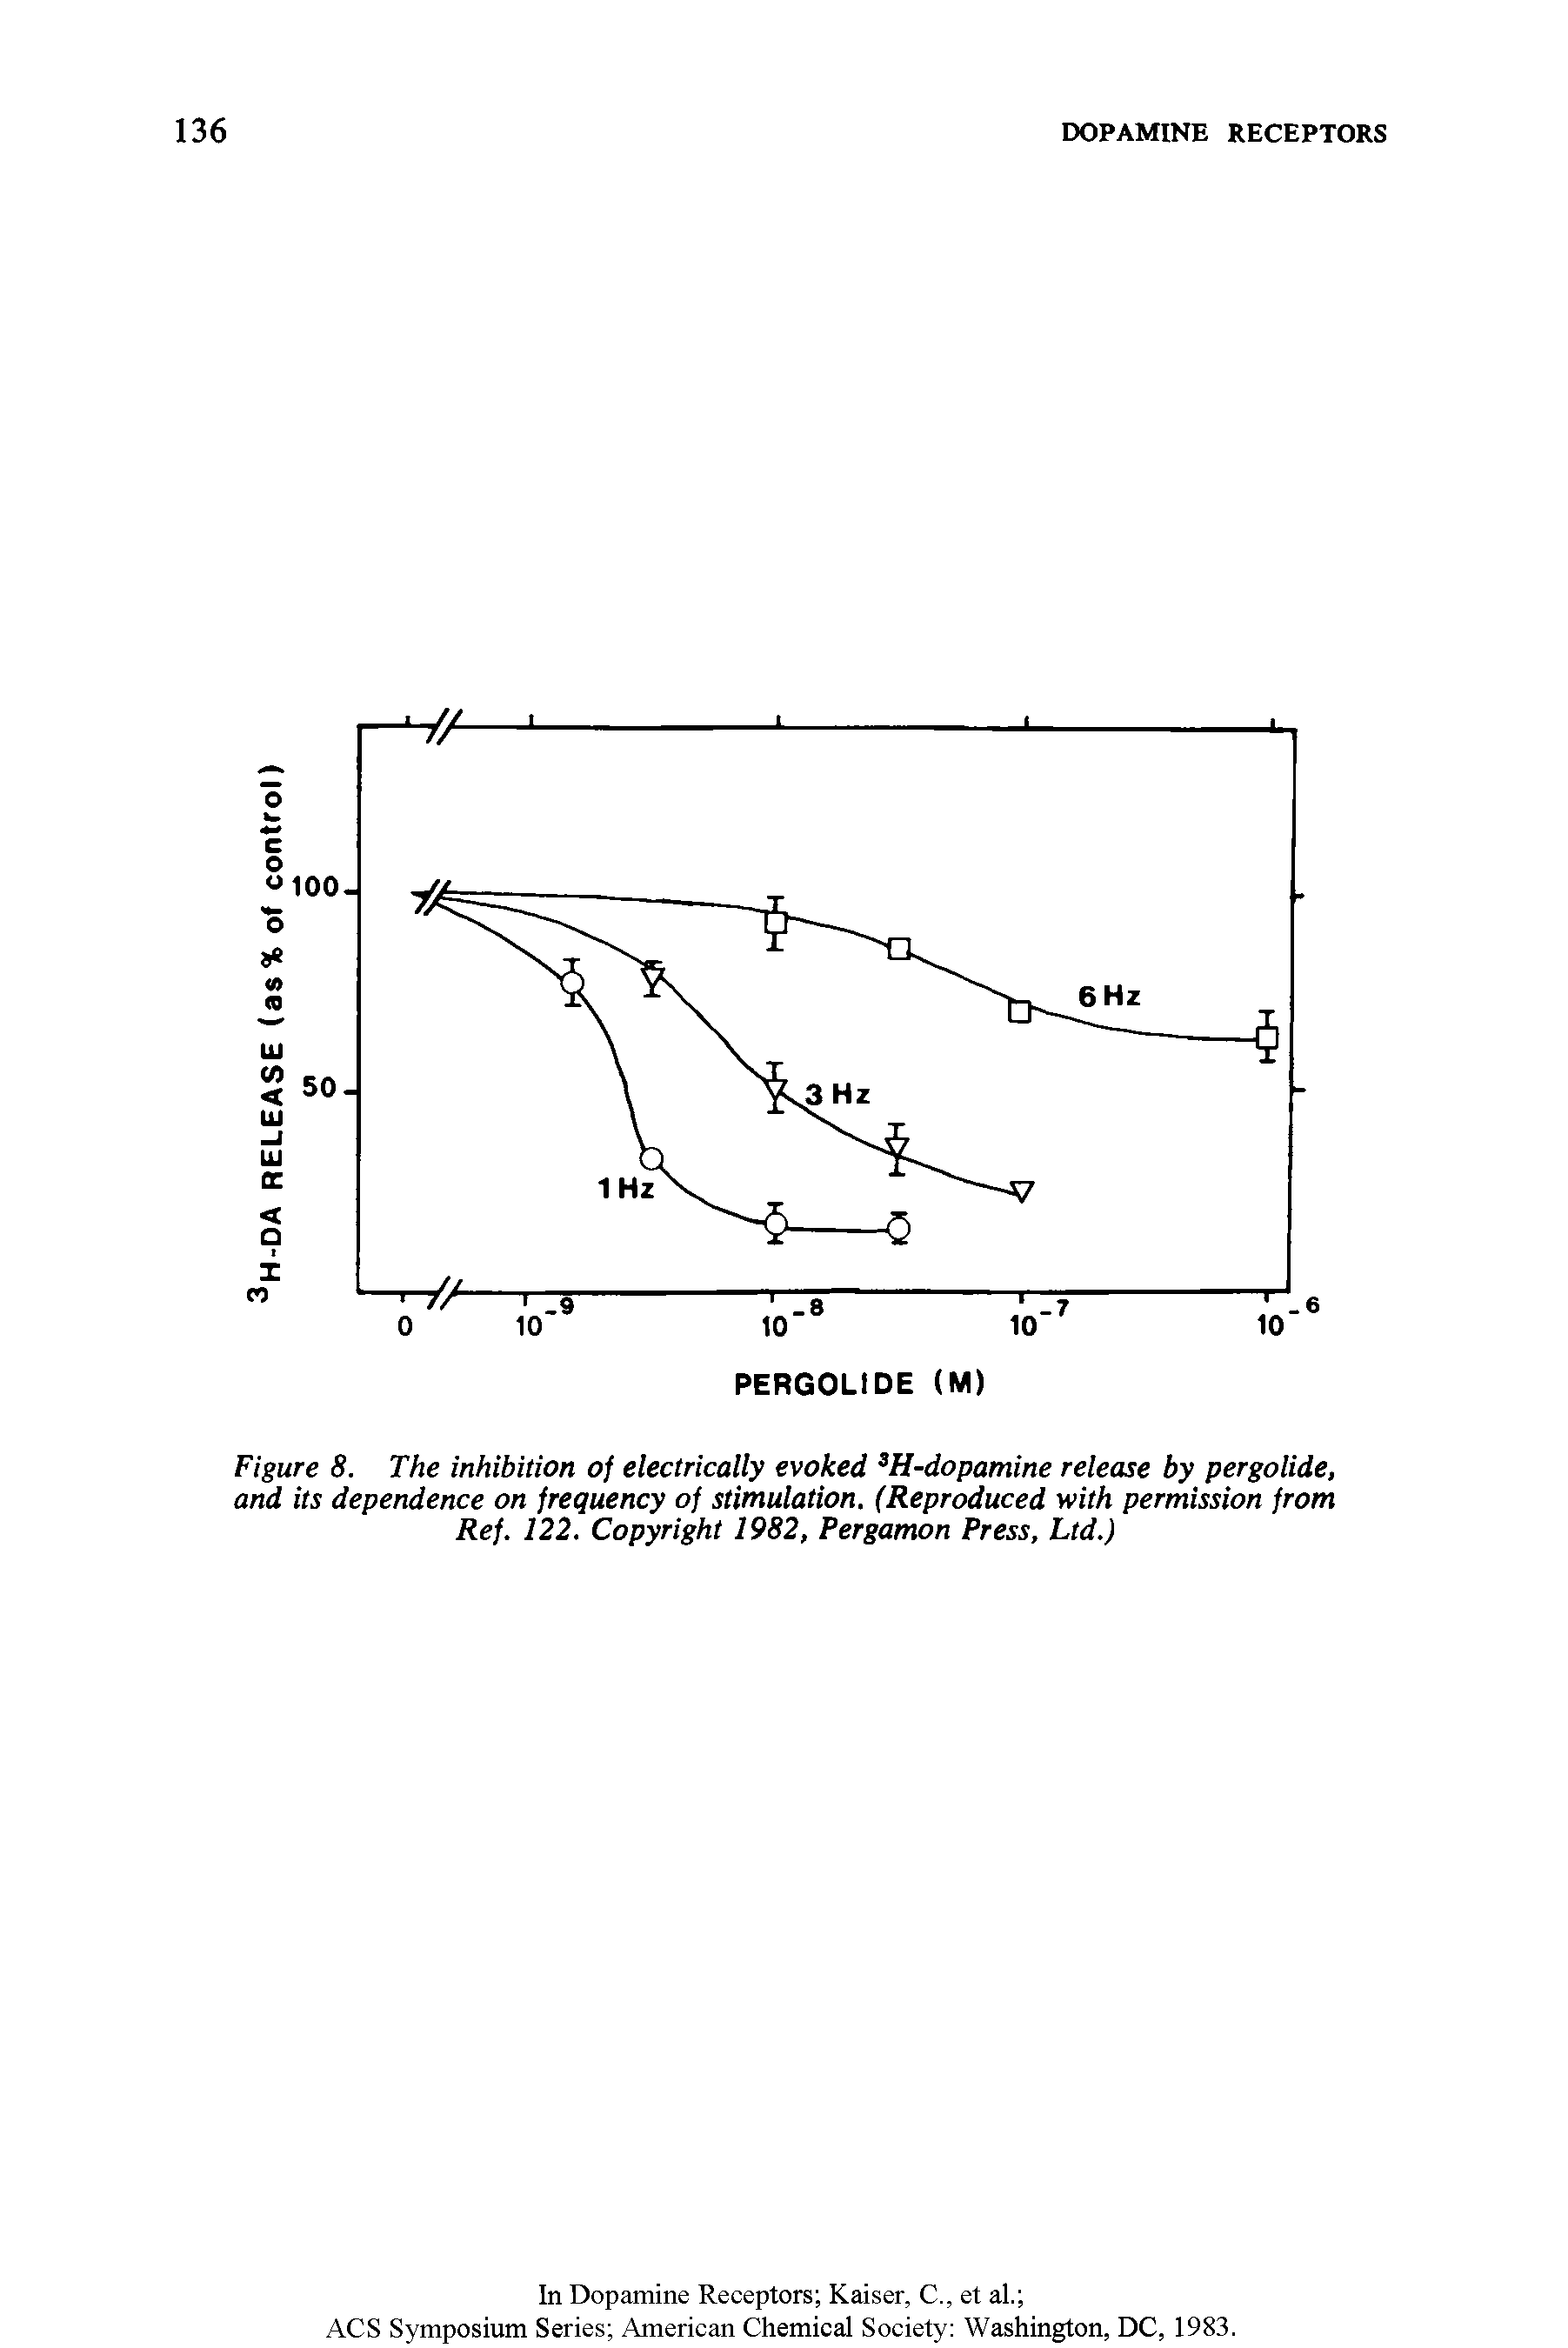 Figure 8. The inhibition of electrically evoked 3H-dopamine release by pergolide, and its dependence on frequency of stimulation. (Reproduced with permission from Ref. 122. Copyright 1982, Pergamon Press, Ltd.)...